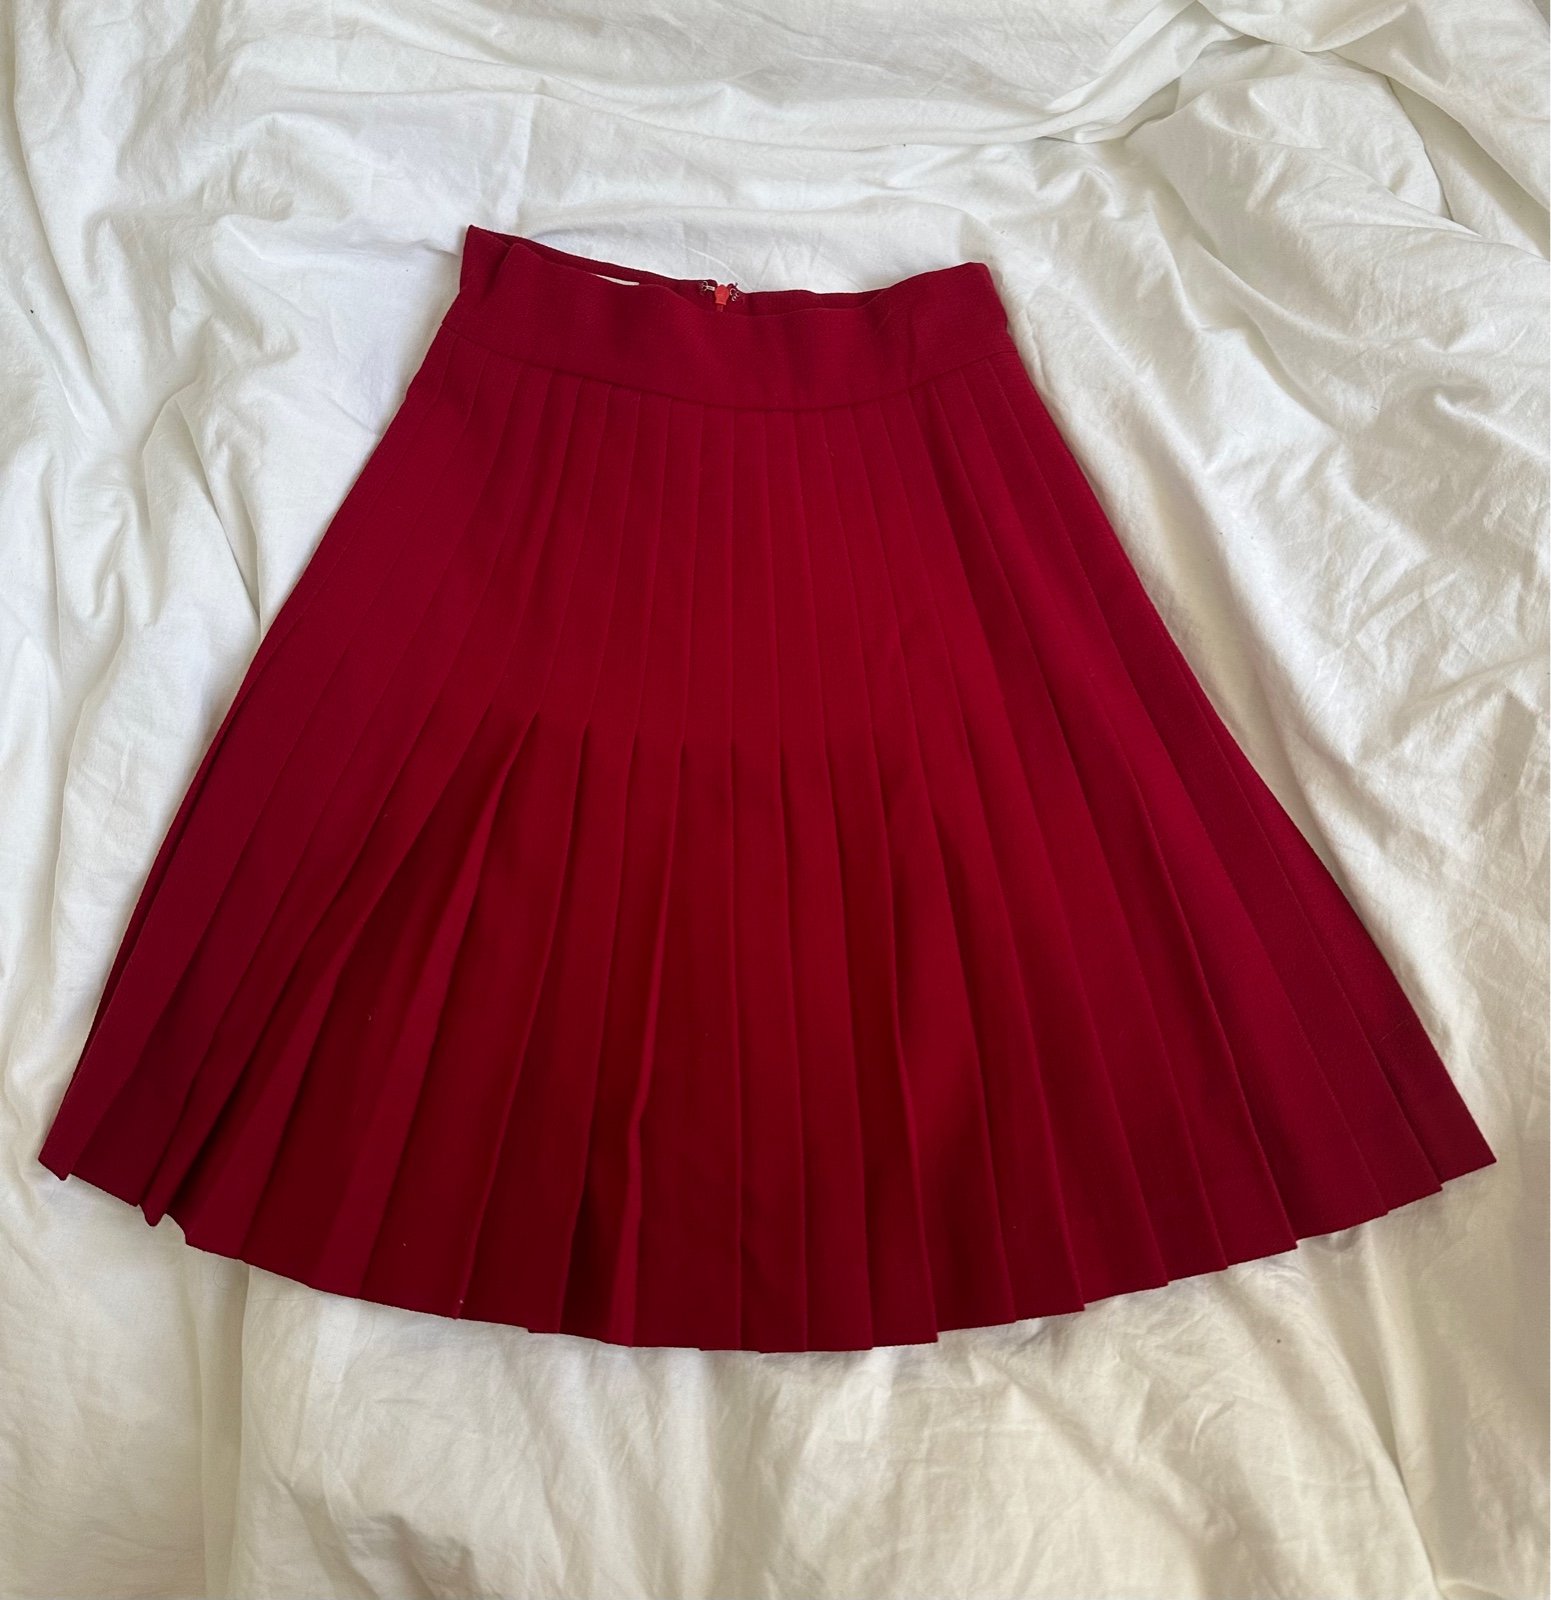 save up to 70% Red Midi Skirt k1GZwJ3lA outlet online s